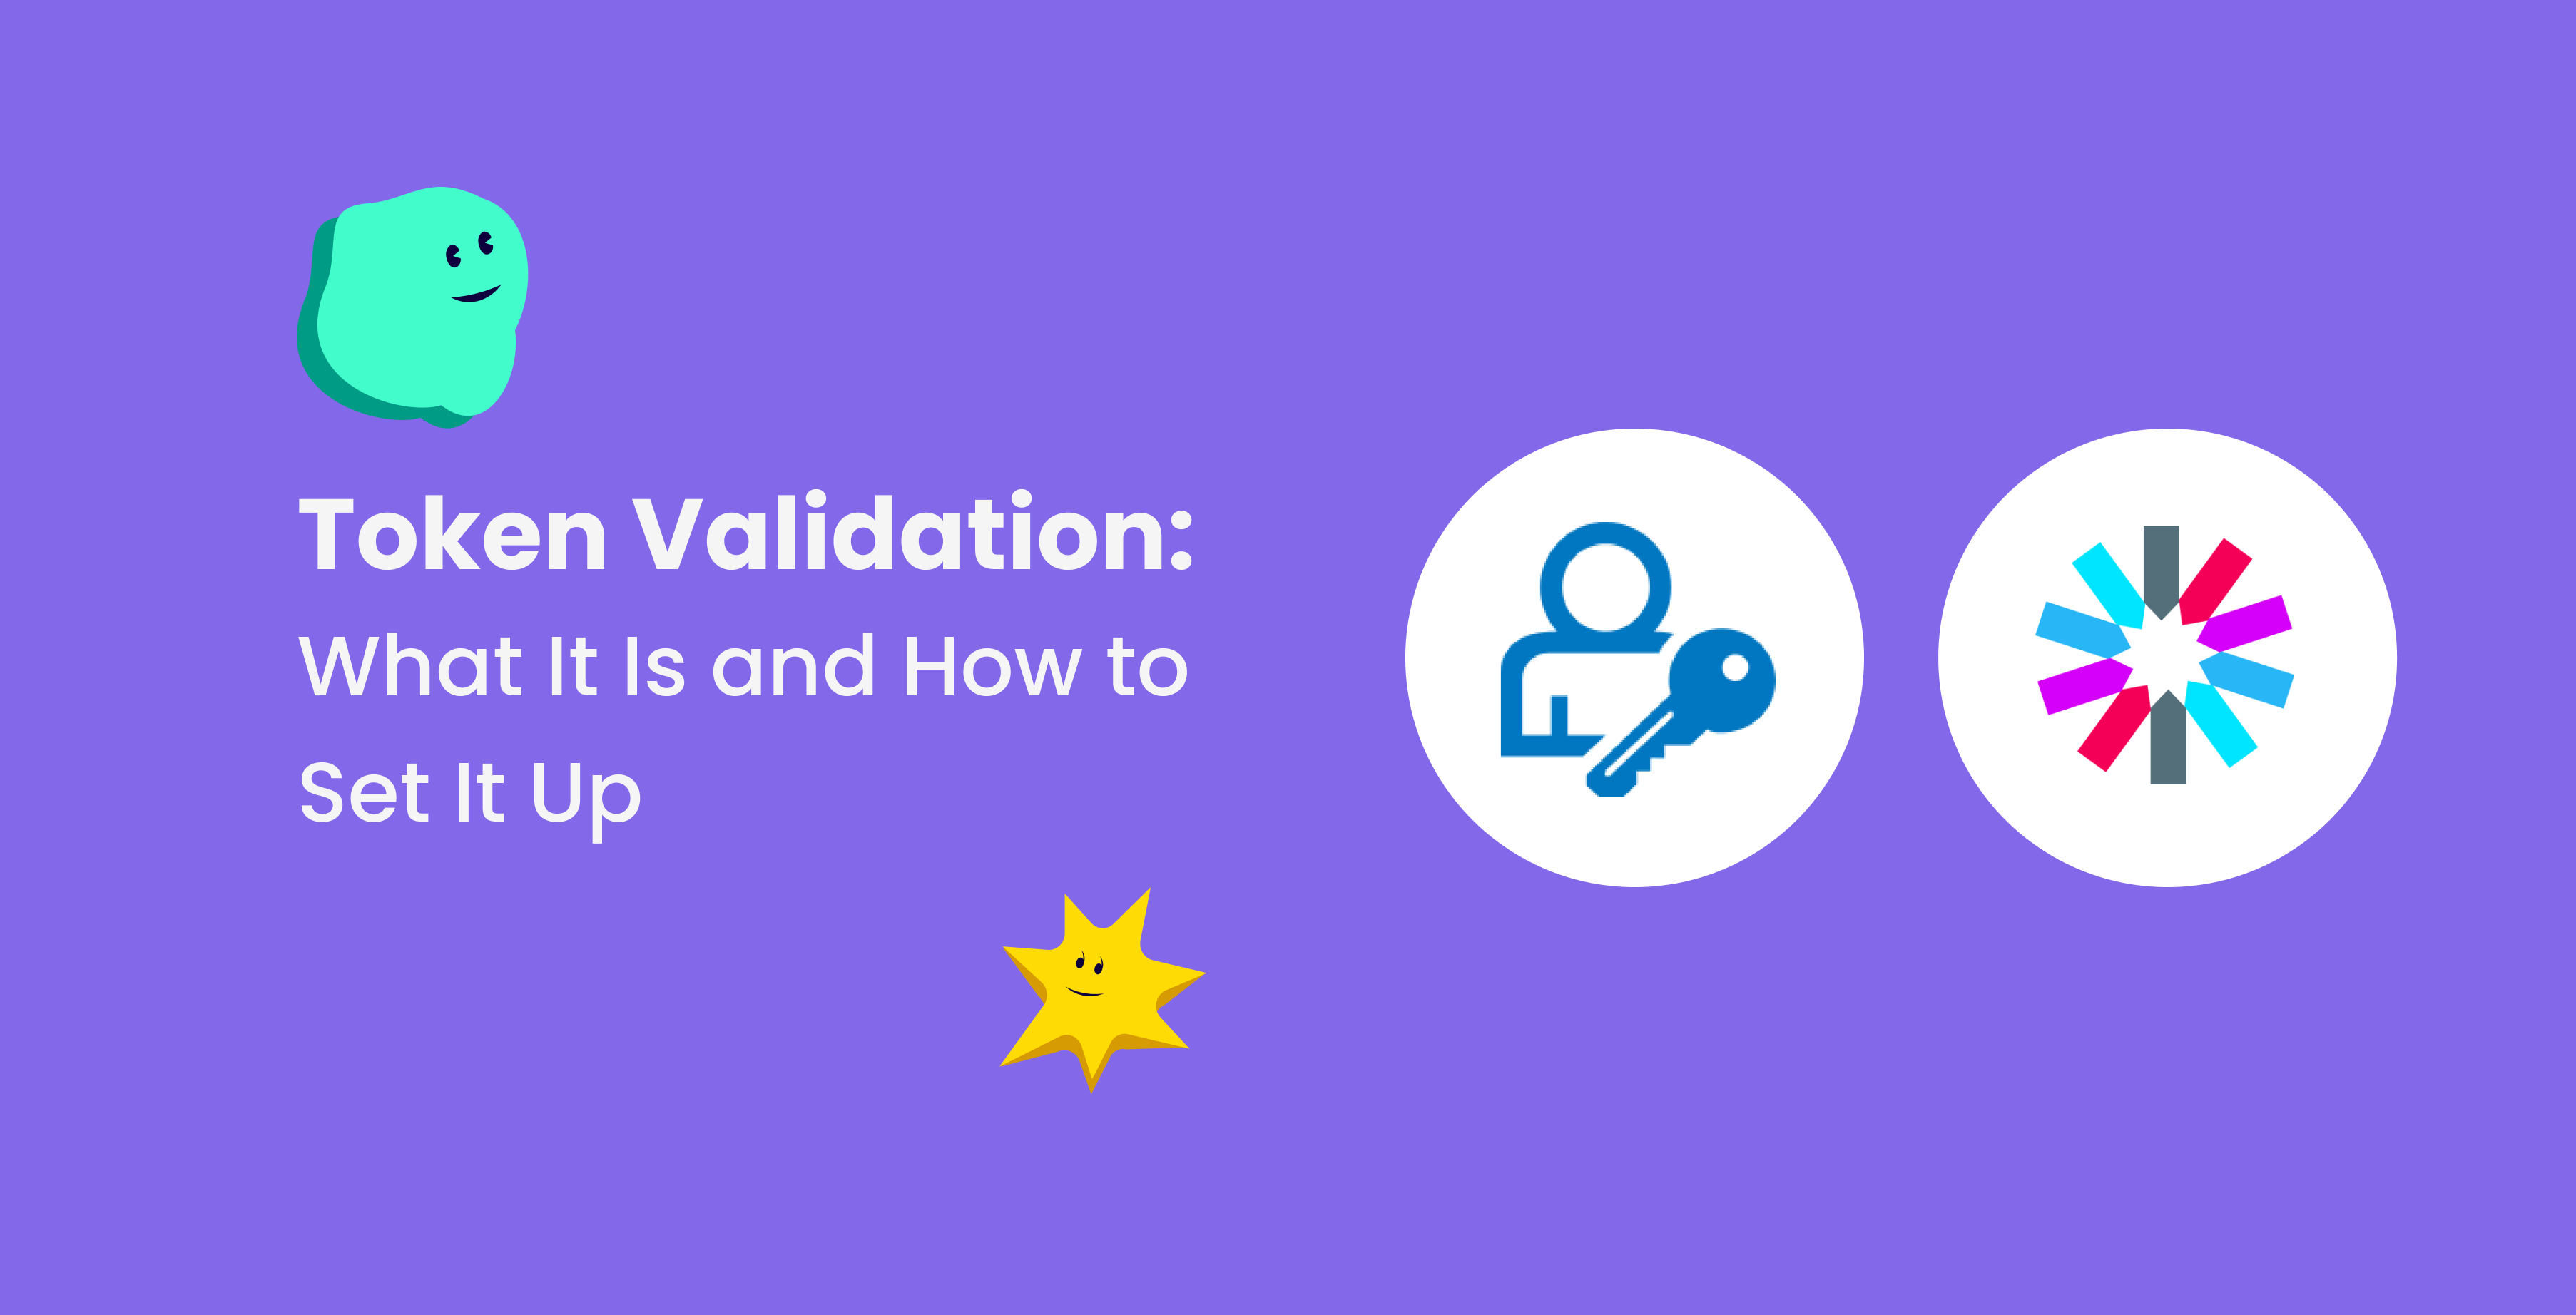 Token Validation: What It Is and How to Set It Up